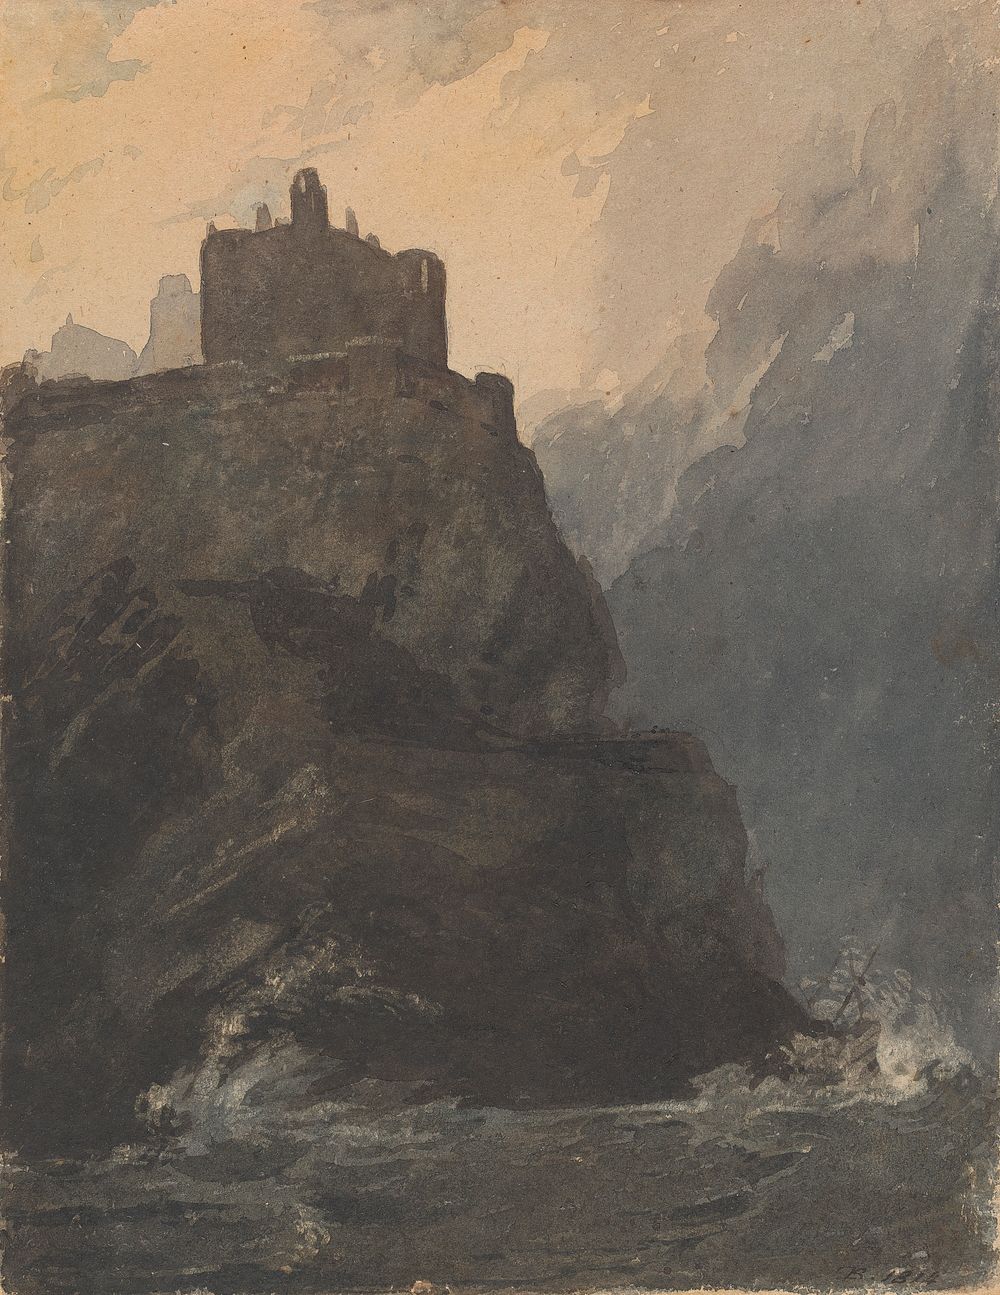 Castle on Cliff, with a Stormy Sea, and Shipwreck at Base of Cliff by Thomas Sully